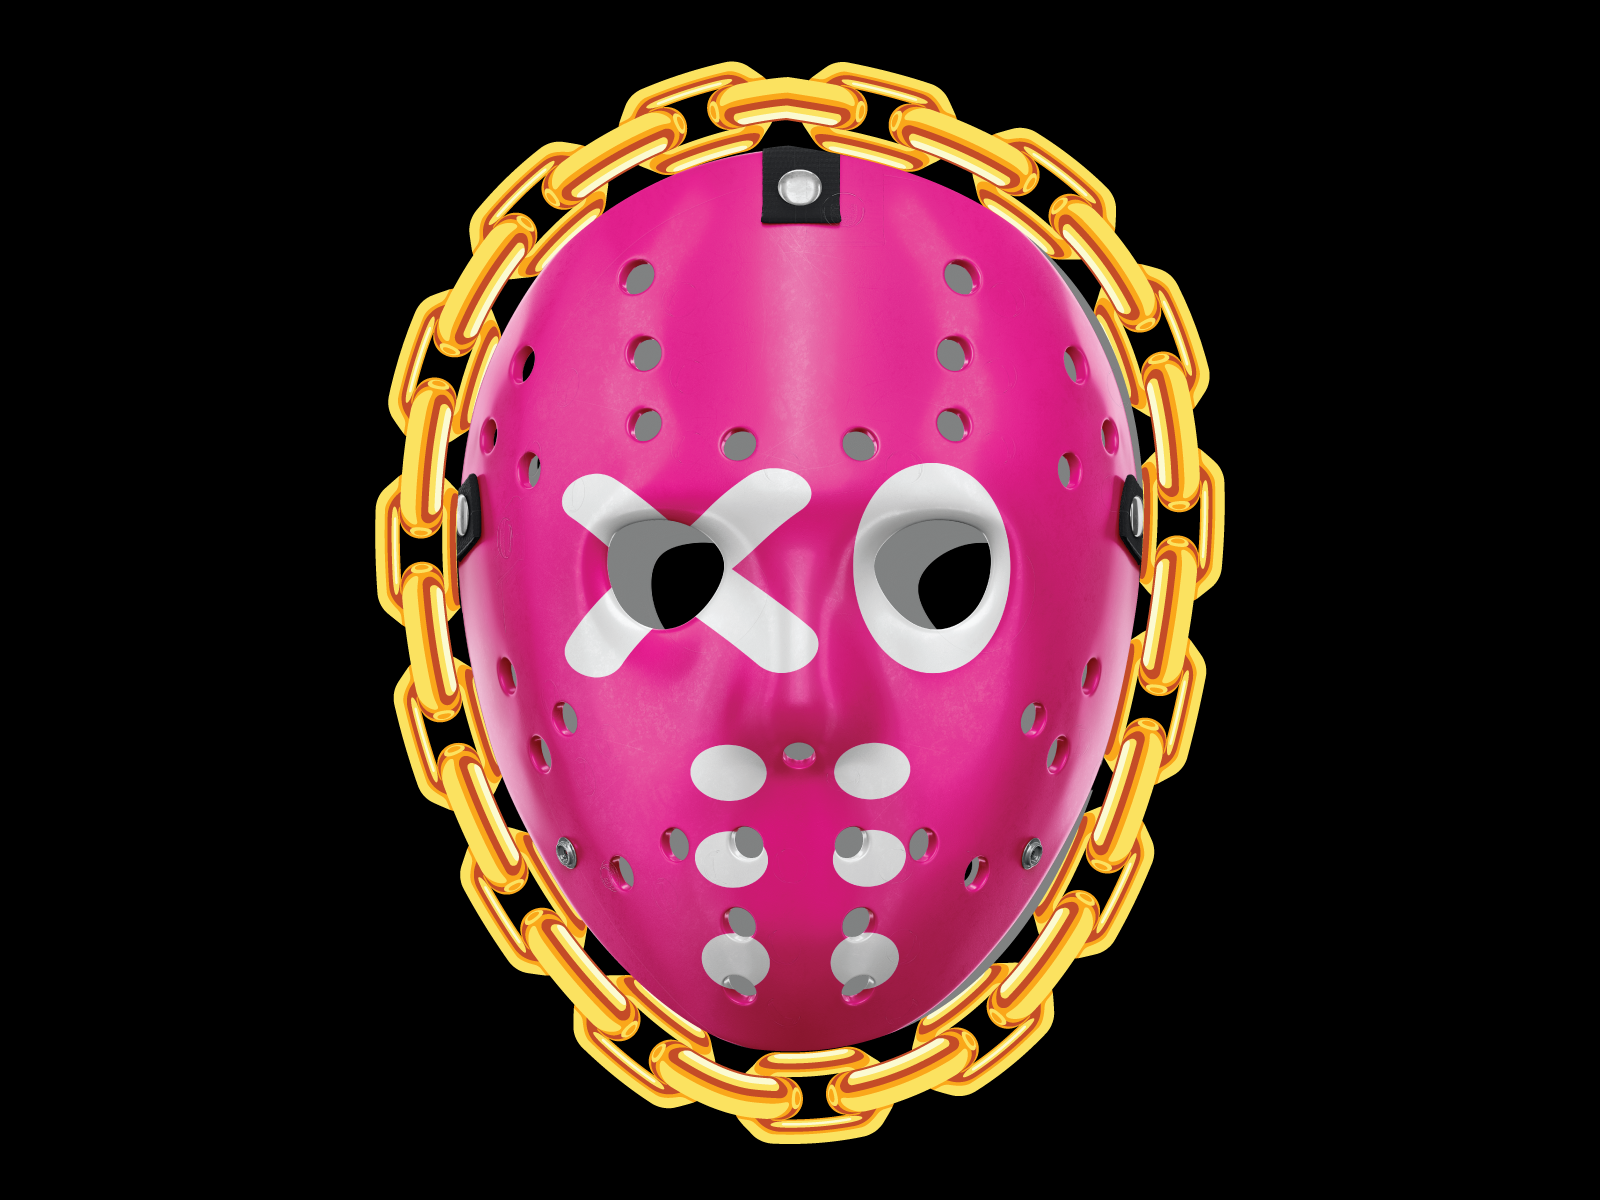 Miami Vice Neon Pink Blue Rave Jason Voorhees Friday the 13th  Etsy